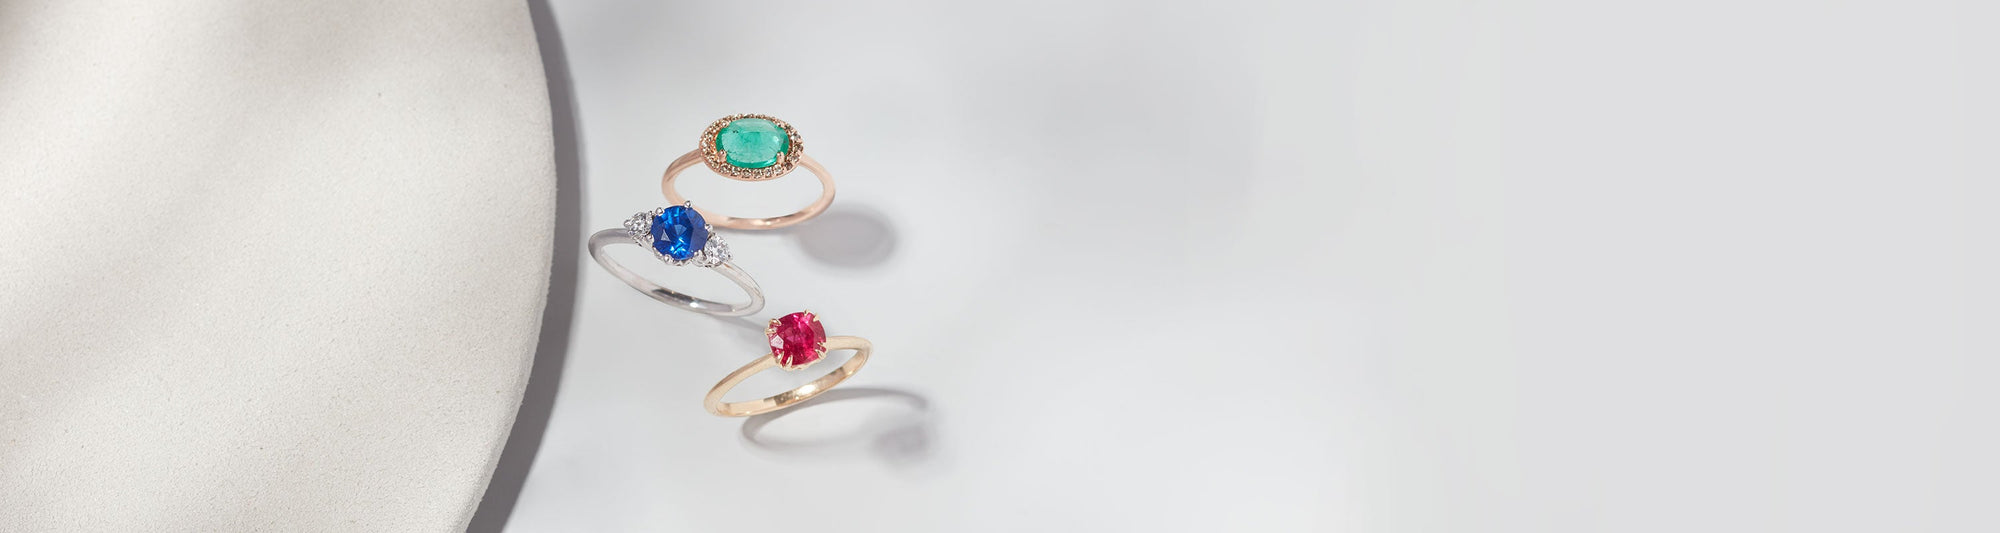 Green emerald, sapphire, and ruby rings stacked next to a circular white stone on a grey background.